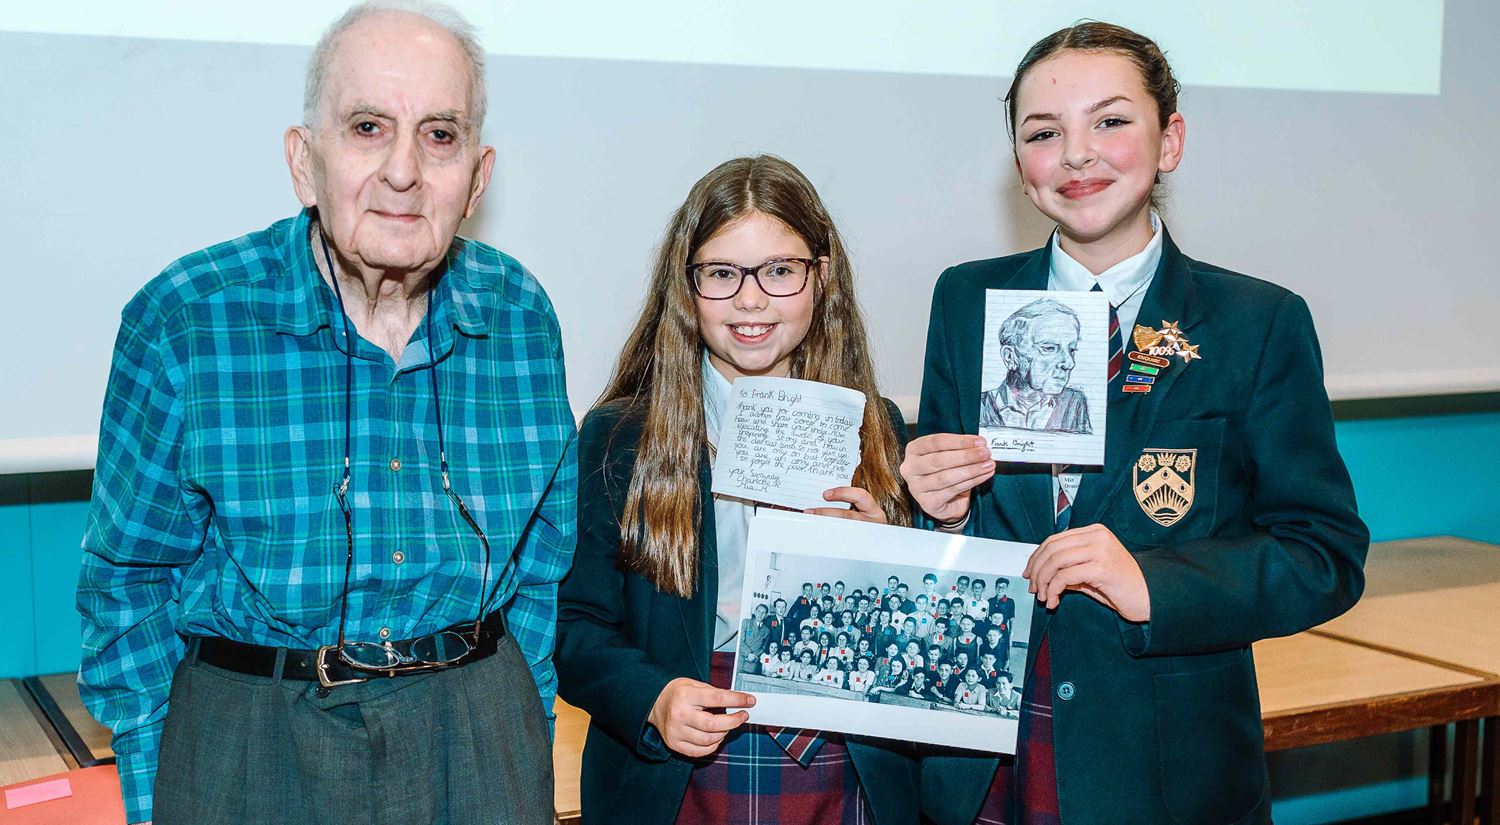 Frank Bright MBE with Ormiston Denes Academy pupils presenting him with work inspired by his talk at the 2020 Dora Love Prize